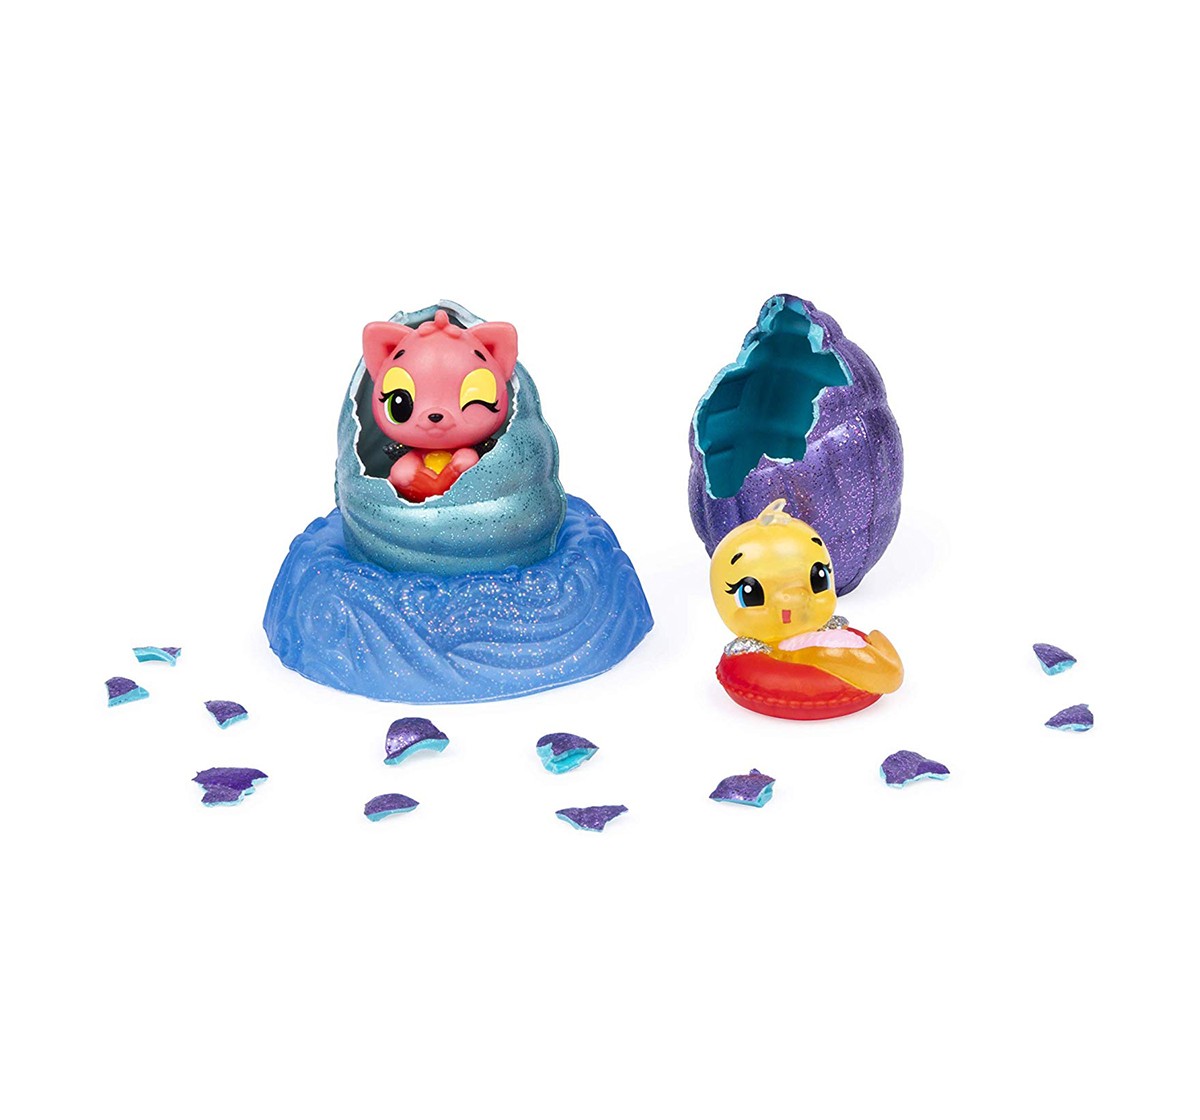 Hatchimals Colleggtibles S5 2 Pack With Nest Novelty for Kids age 3Y+ - 4.318 Cm 